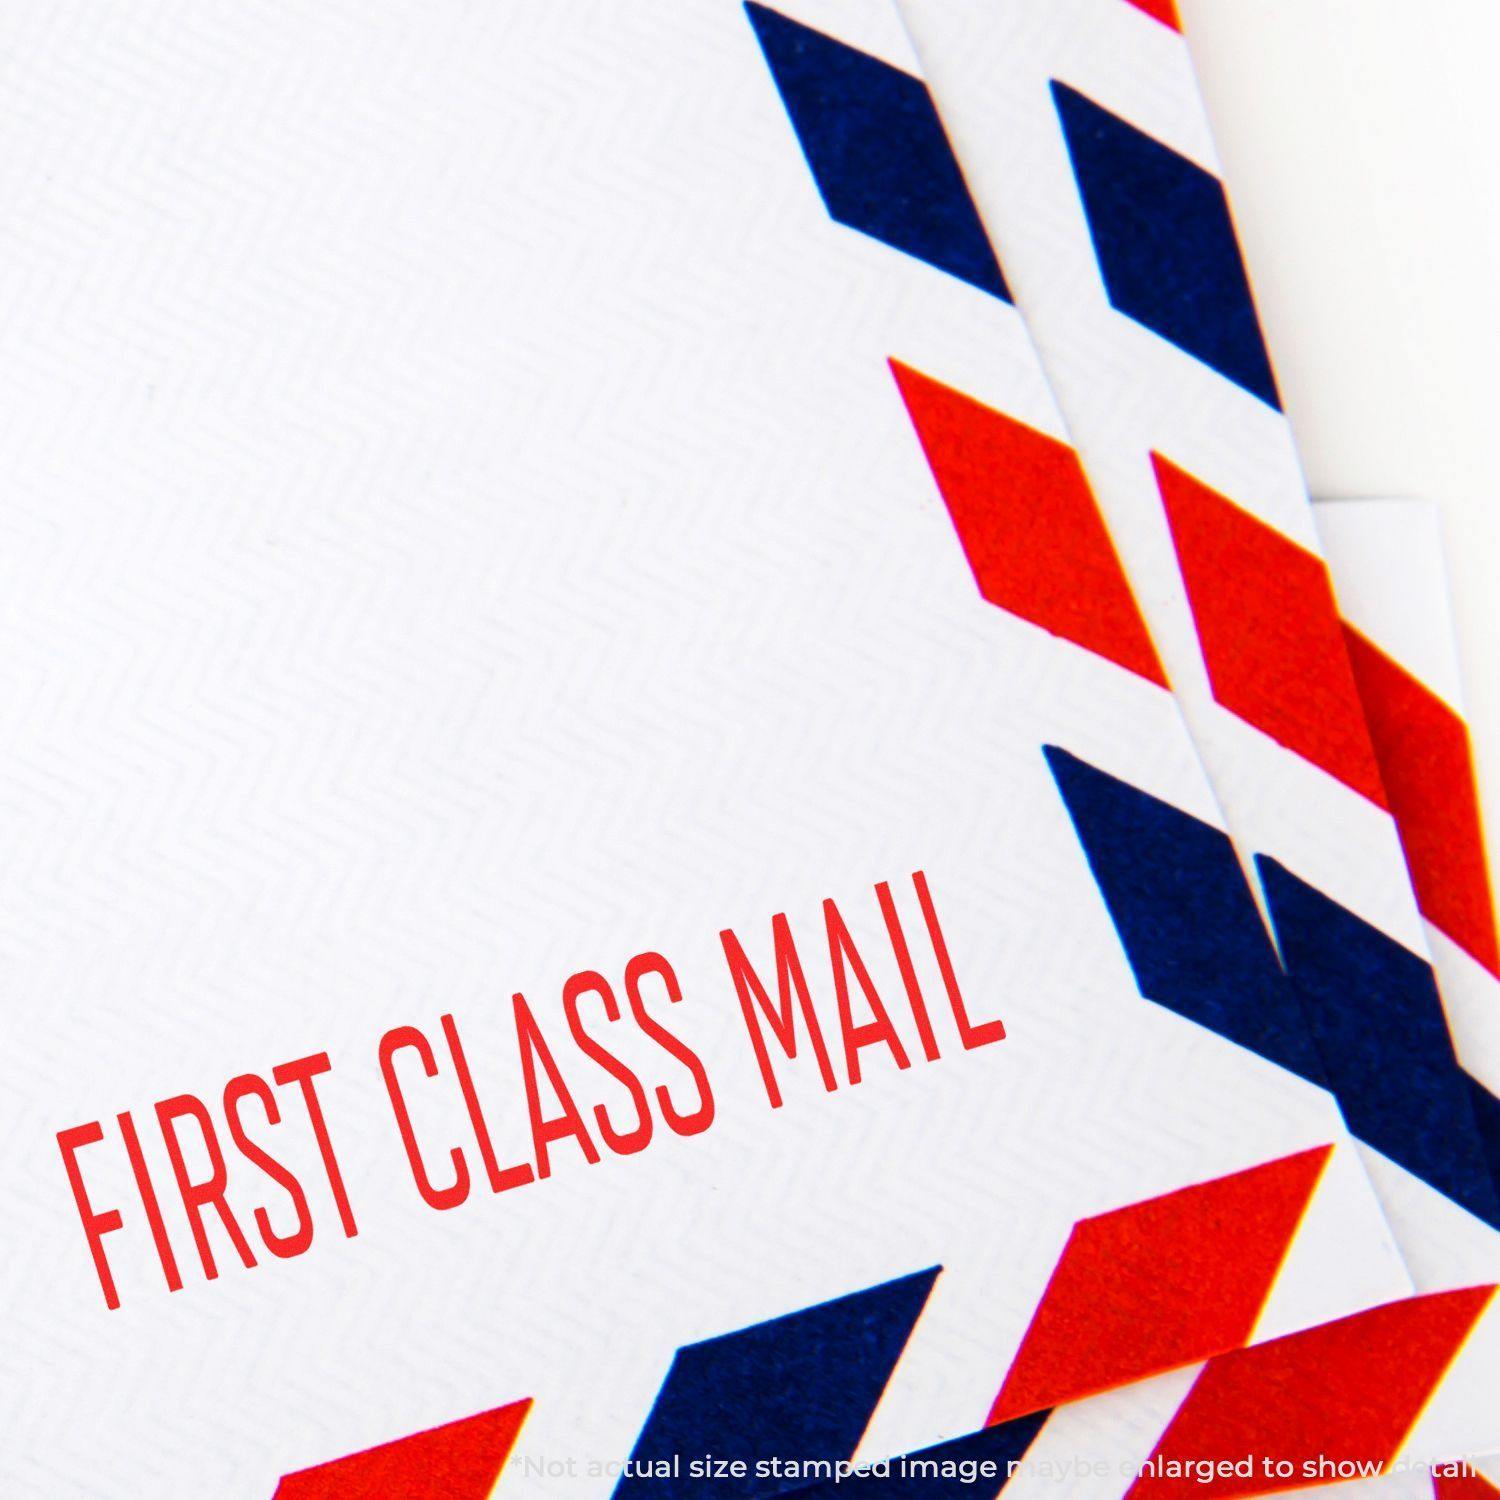 In Use Large Pre-Inked Narrow Font First Class Mail Stamp Image